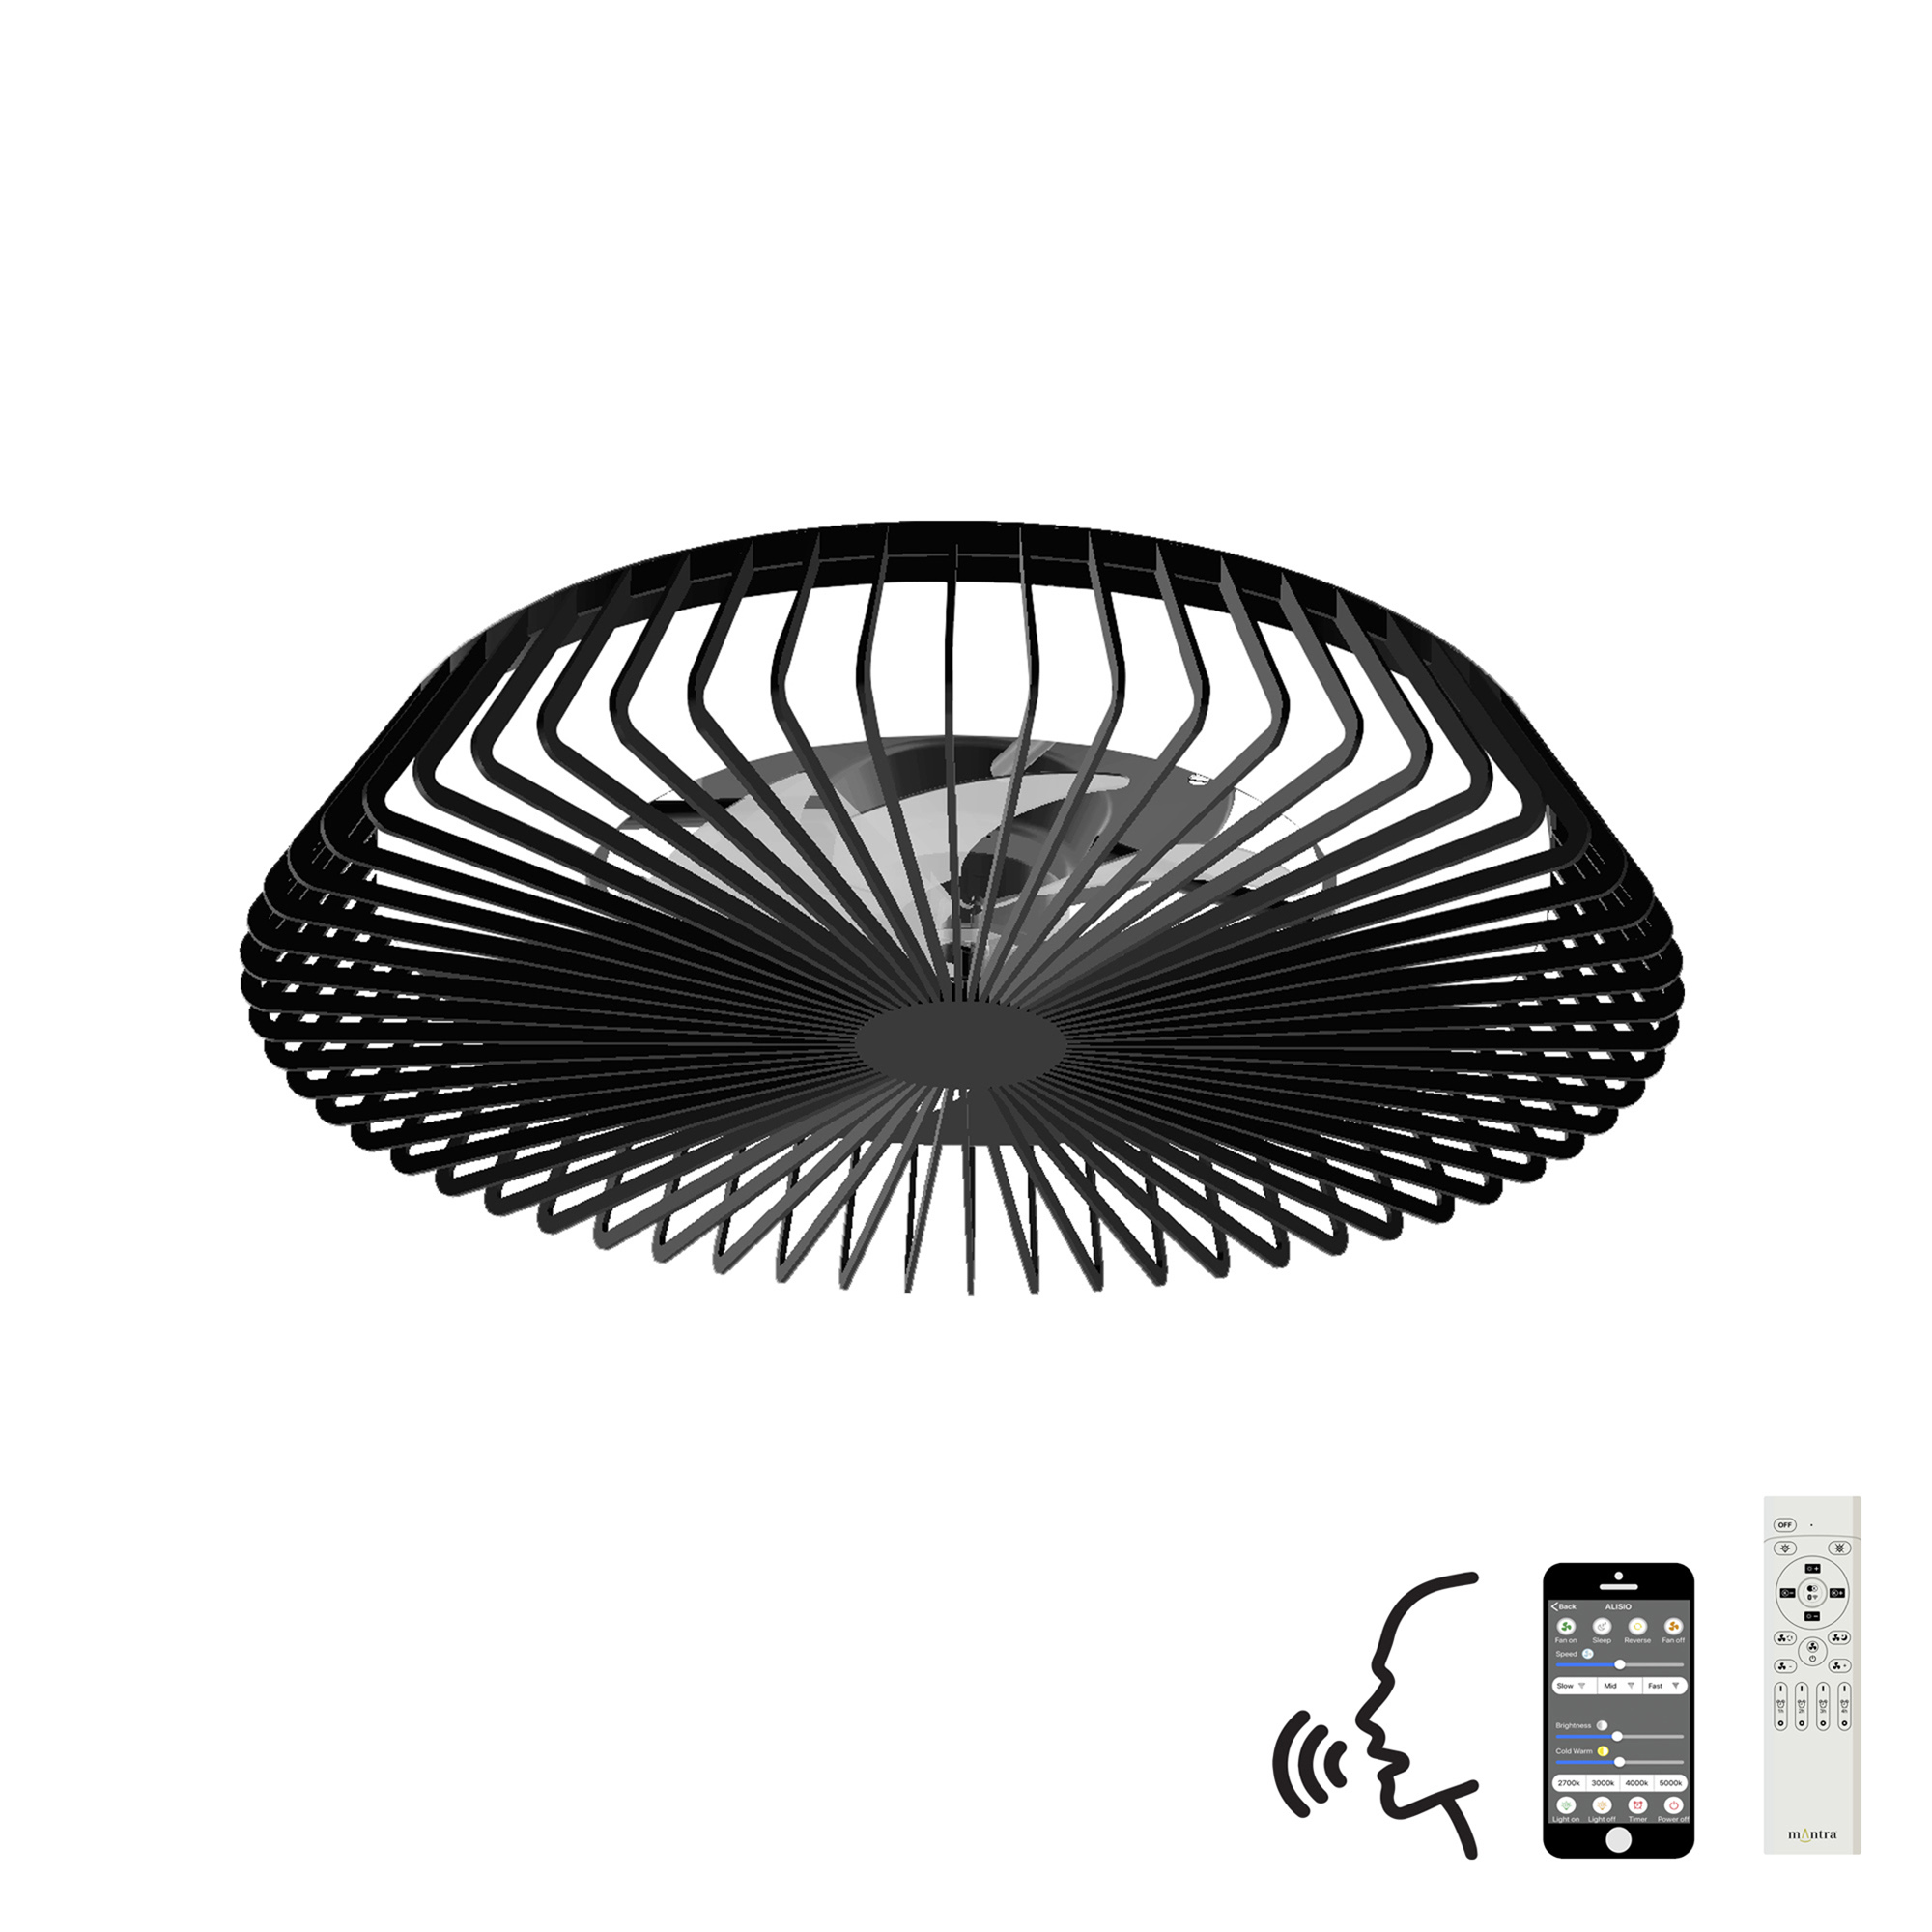 M7121  Himalaya 70W LED Dimmable Ceiling Light & Fan, Remote / APP / Voice Controlled Black